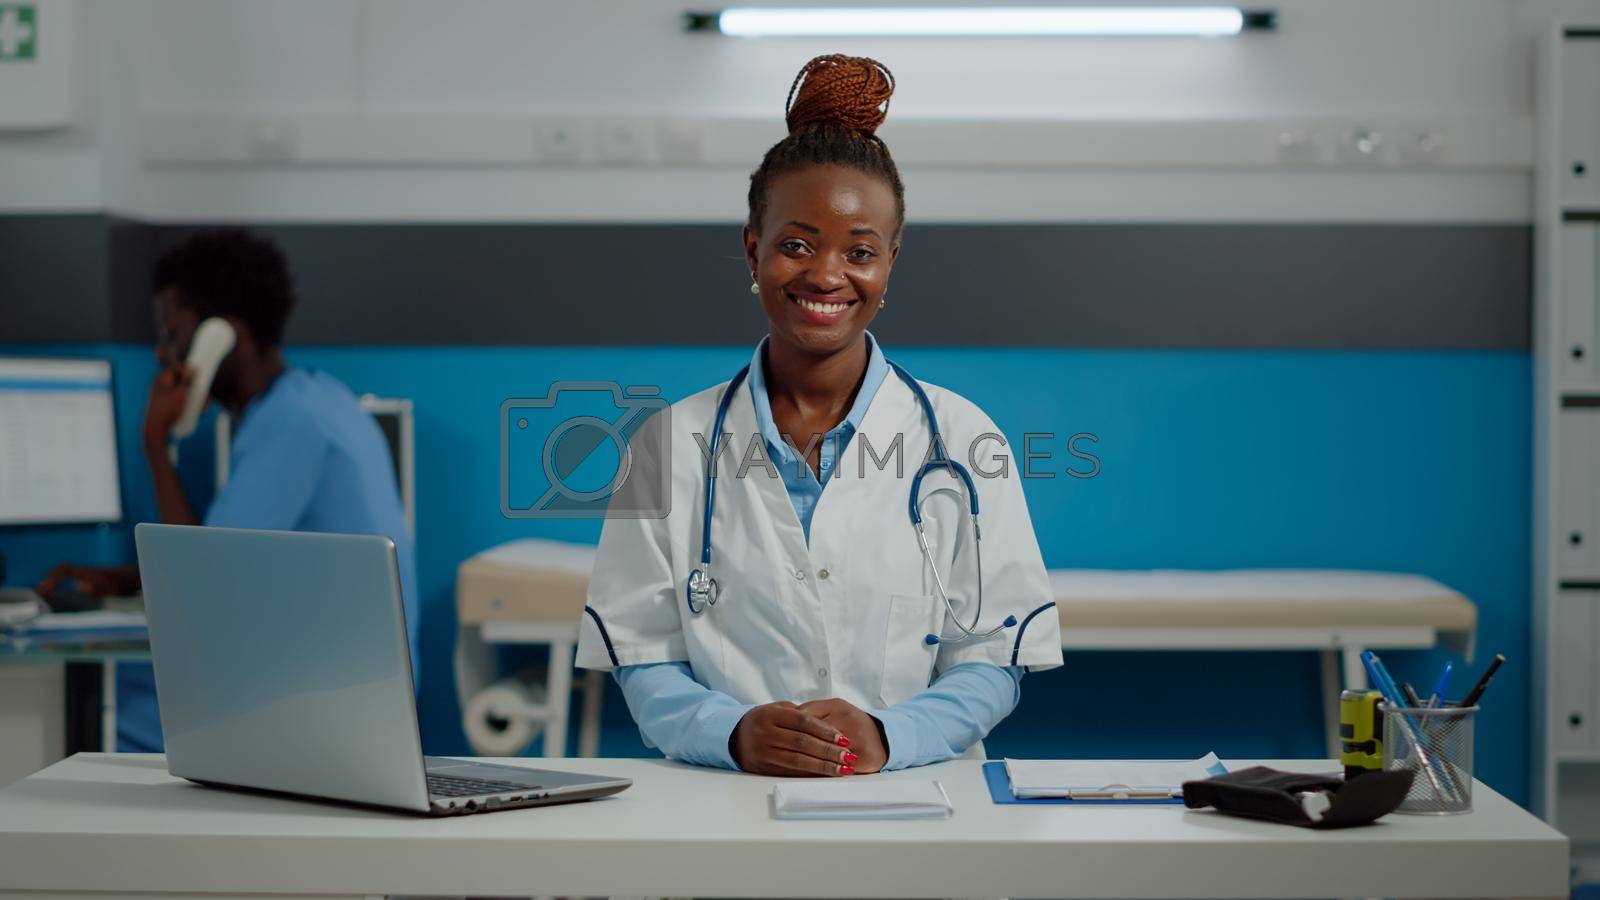 Portrait of woman working as medic in office at healthcare clinic. Doctor wearing white coat and stethoscope while sitting at desk in medical cabinet smiling and looking at camera